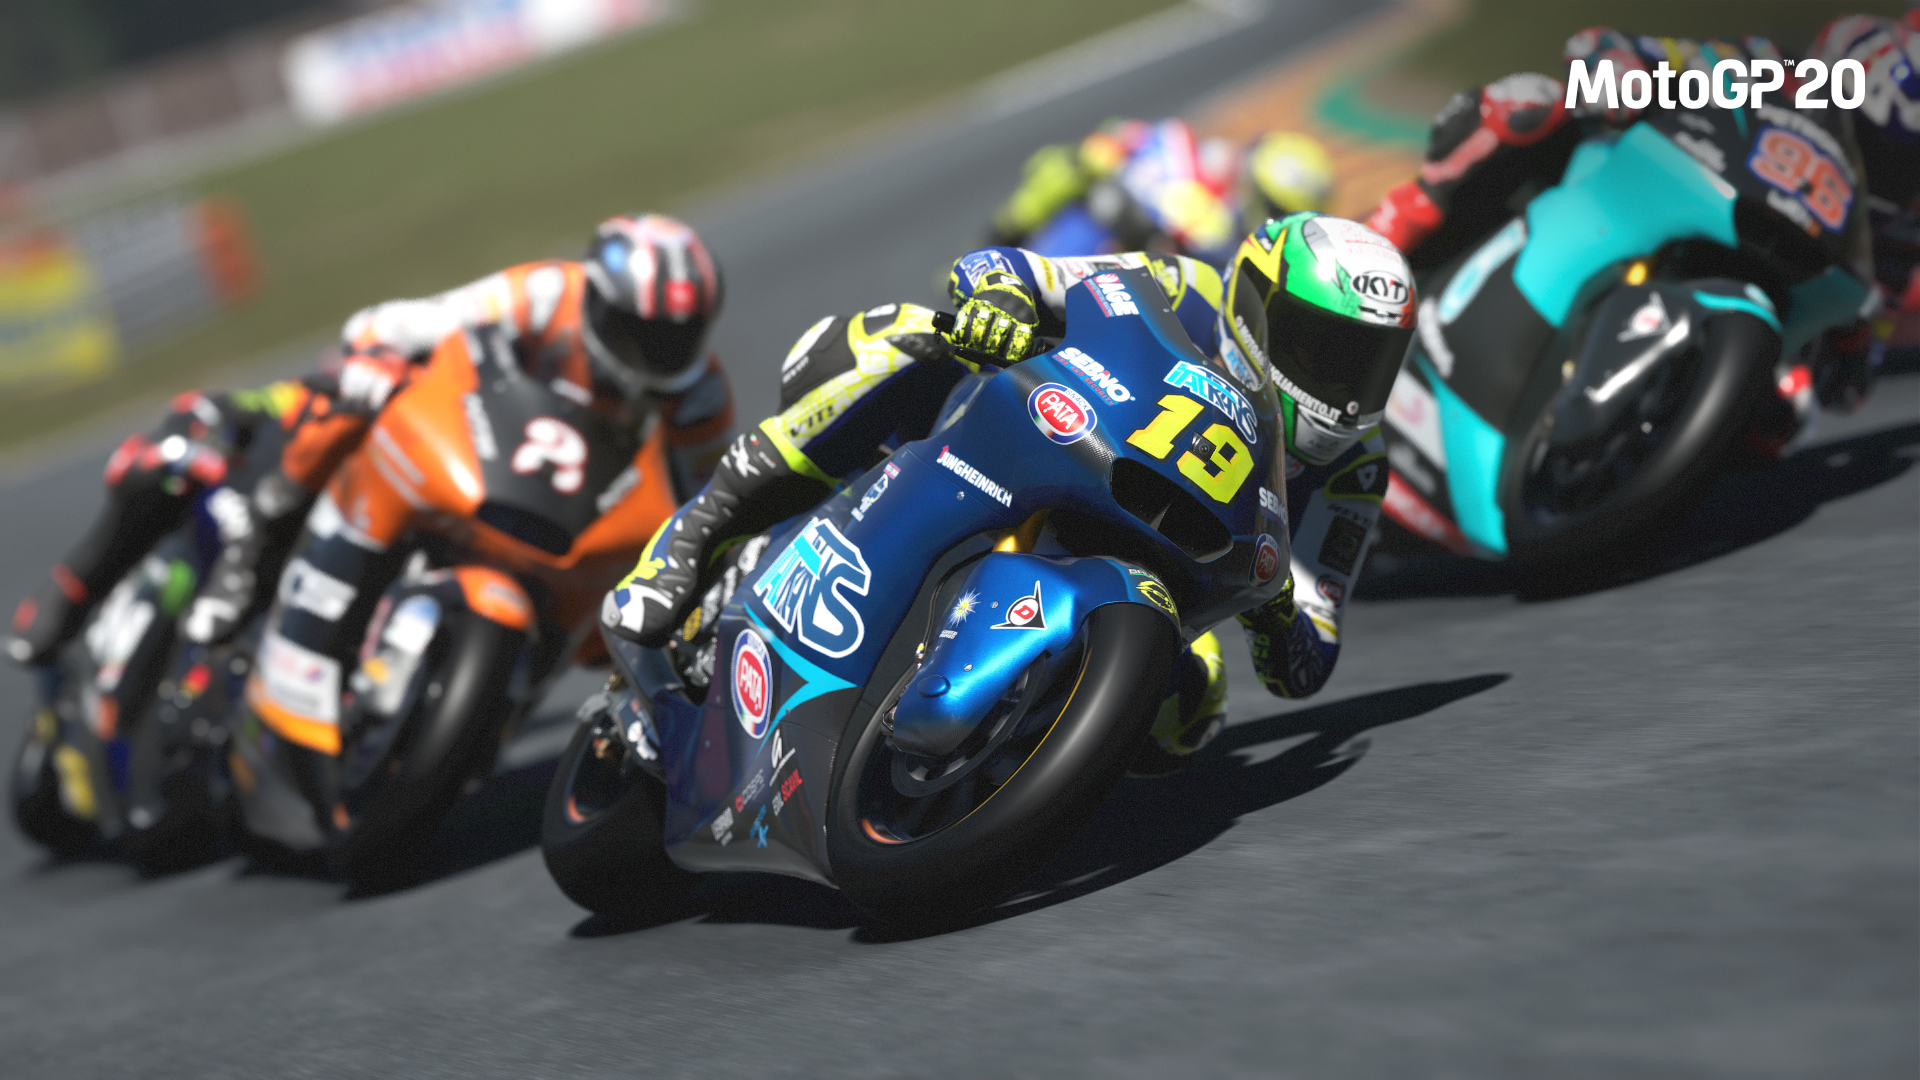 Mineraalwater dronken klok MotoGP 20 Patch 1.09 Updates Moto2 and Moto3 3D Models and Liveries, Adds  Red Bull MotoGP Rookies Cup and More - Operation Sports